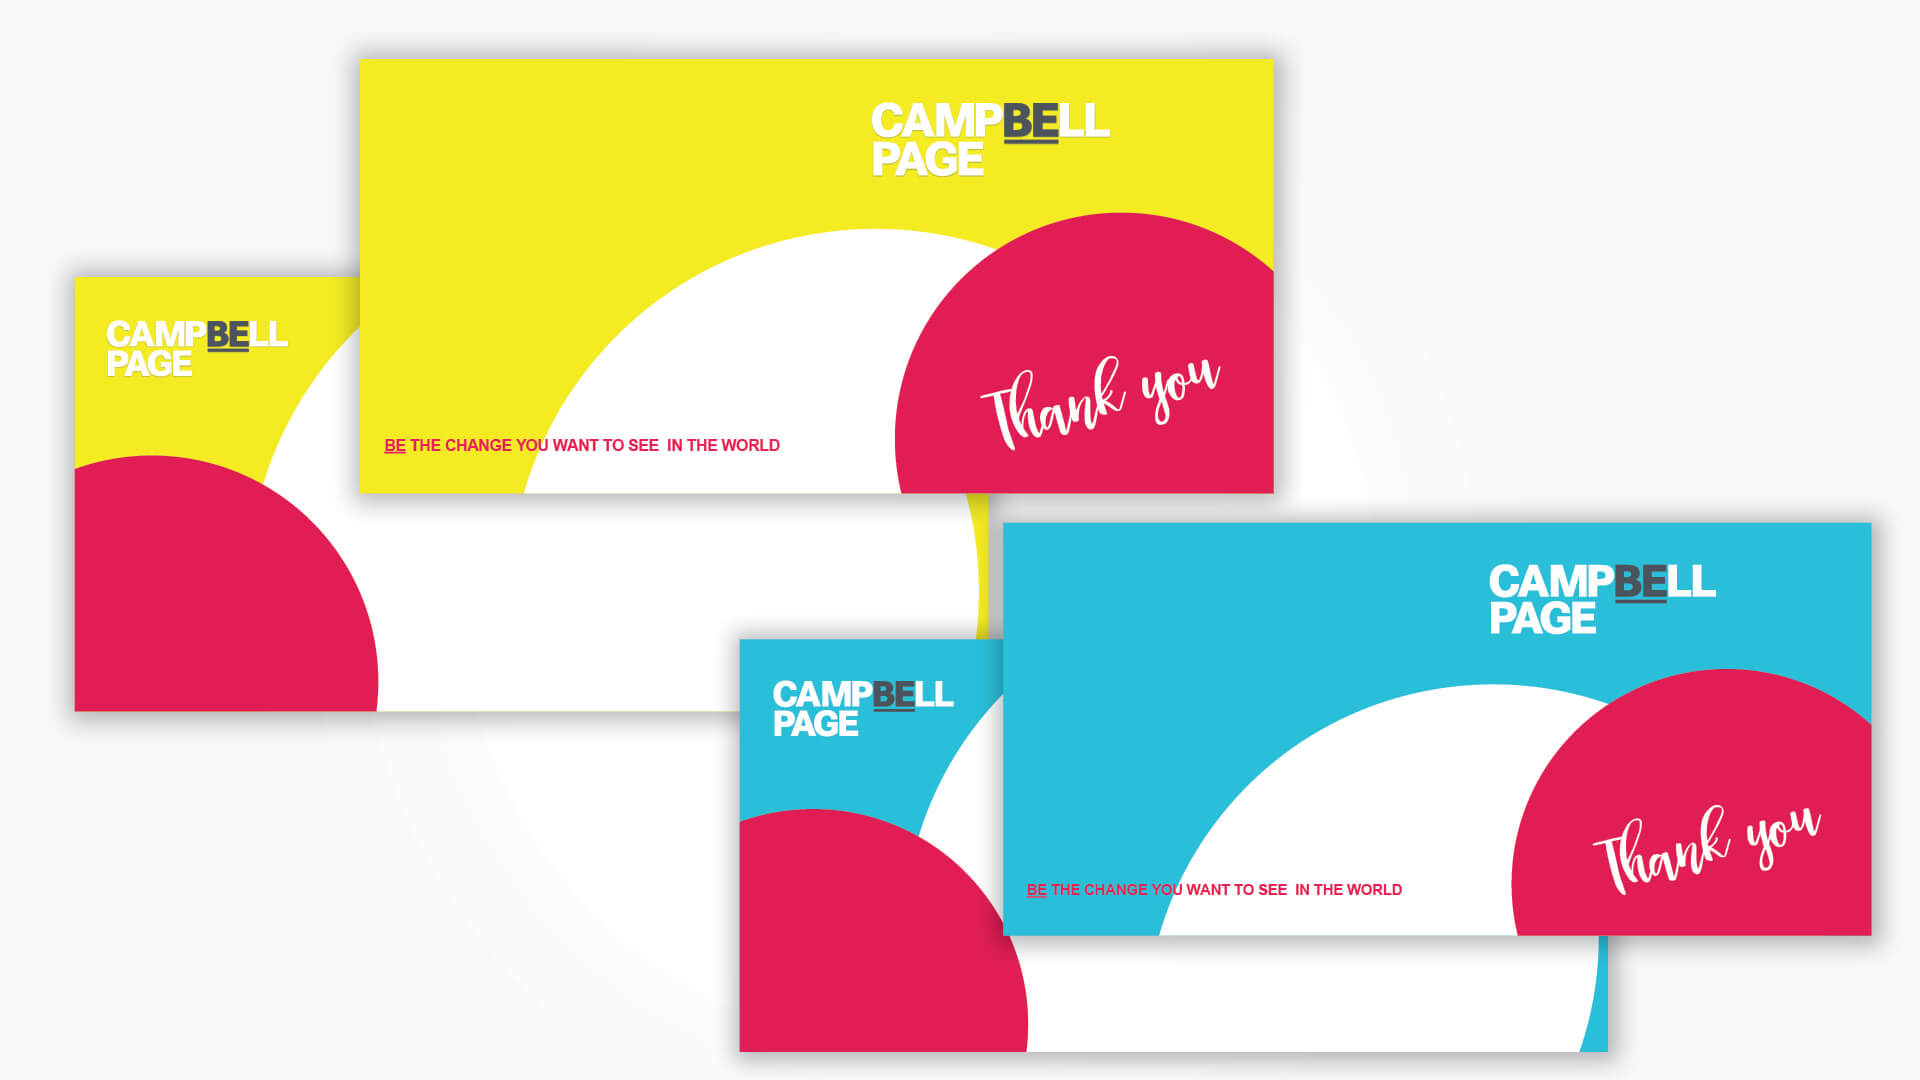 Campbell Page Brand Refresh and Rollout